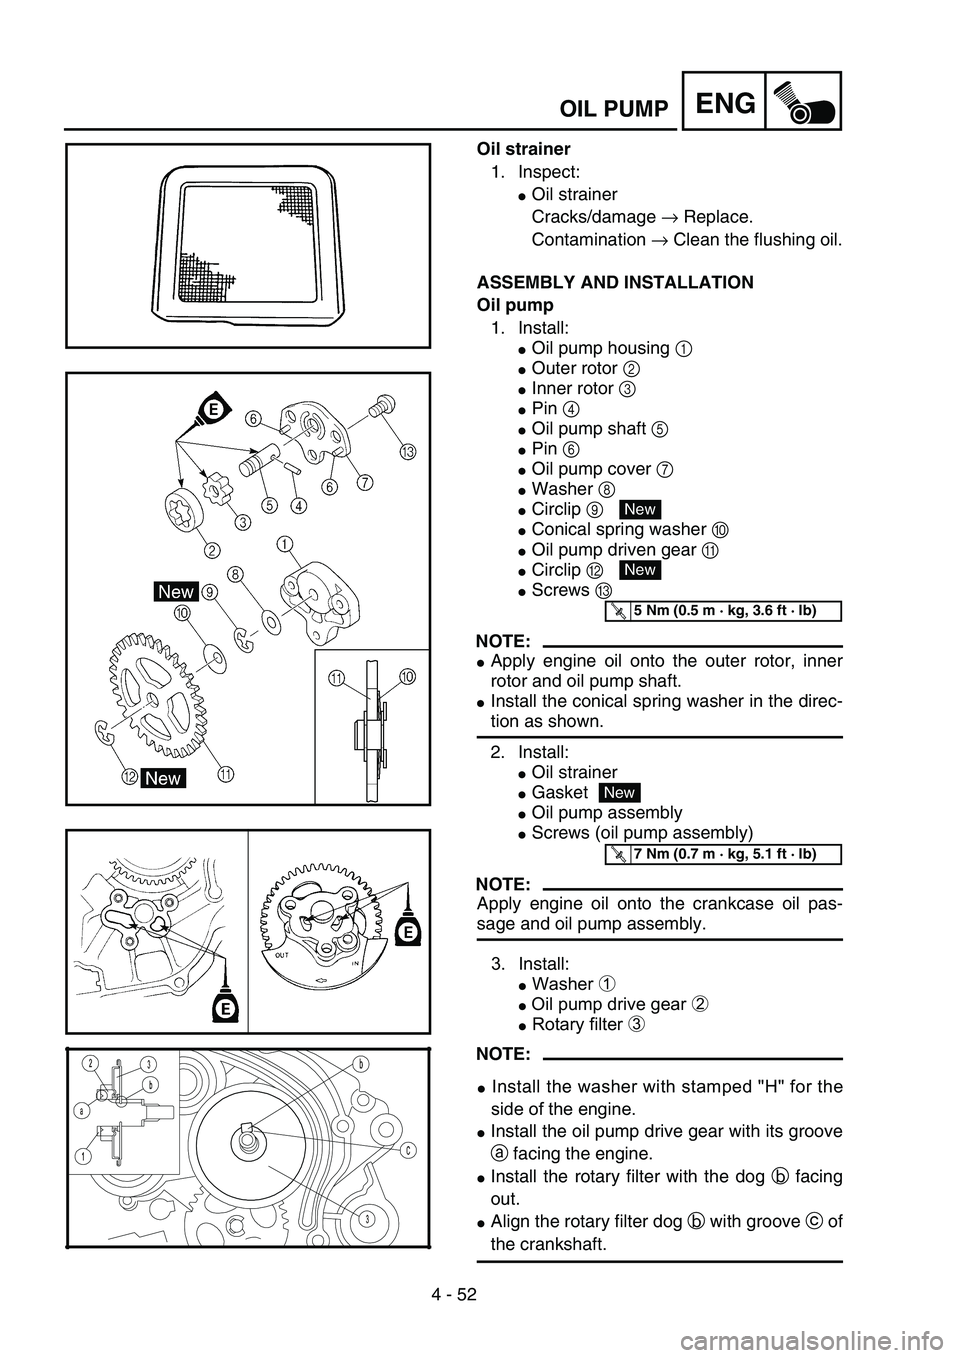 YAMAHA TTR125 2006 Repair Manual 4 - 52
ENGOIL PUMP
Oil strainer1. Inspect:
●Oil strainer
Cracks/damage  → Replace.
Contamination  → Clean the flushing oil.
ASSEMBLY AND INSTALLATION
Oil pump
1. Install:
●Oil pump housing  1 